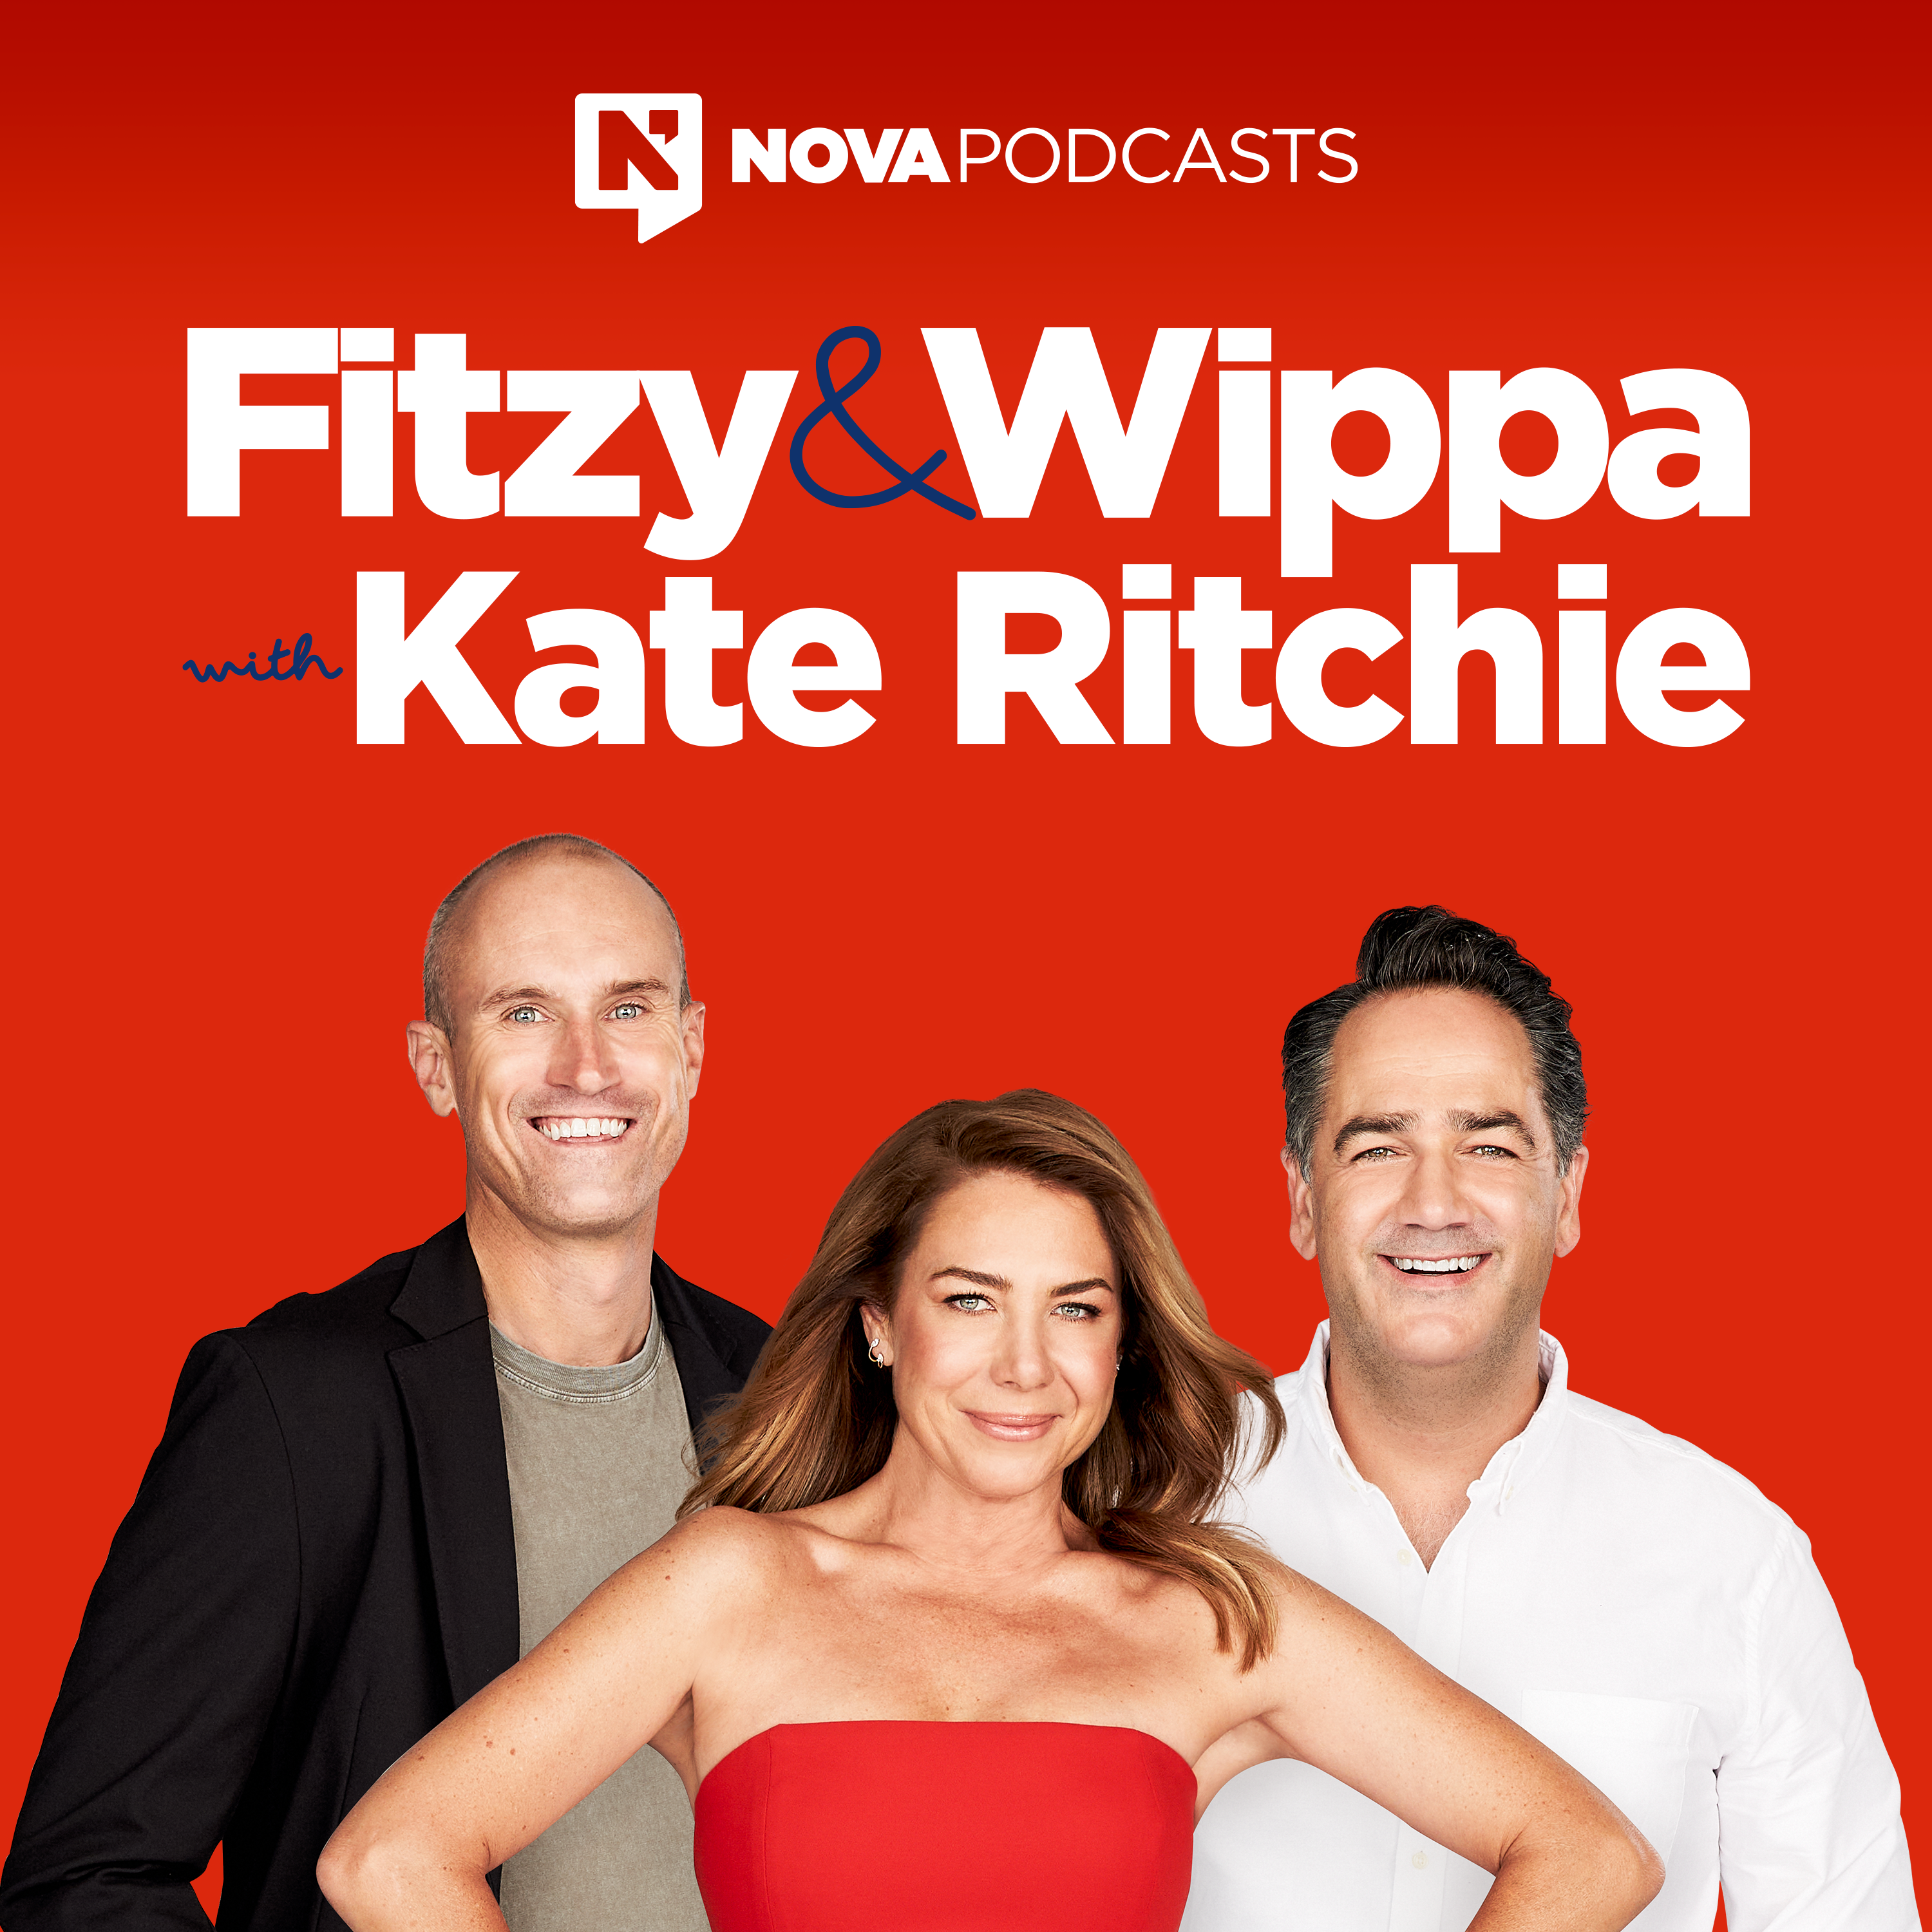 CATCH UP - Wippa's side effects from this medication will make you LOL